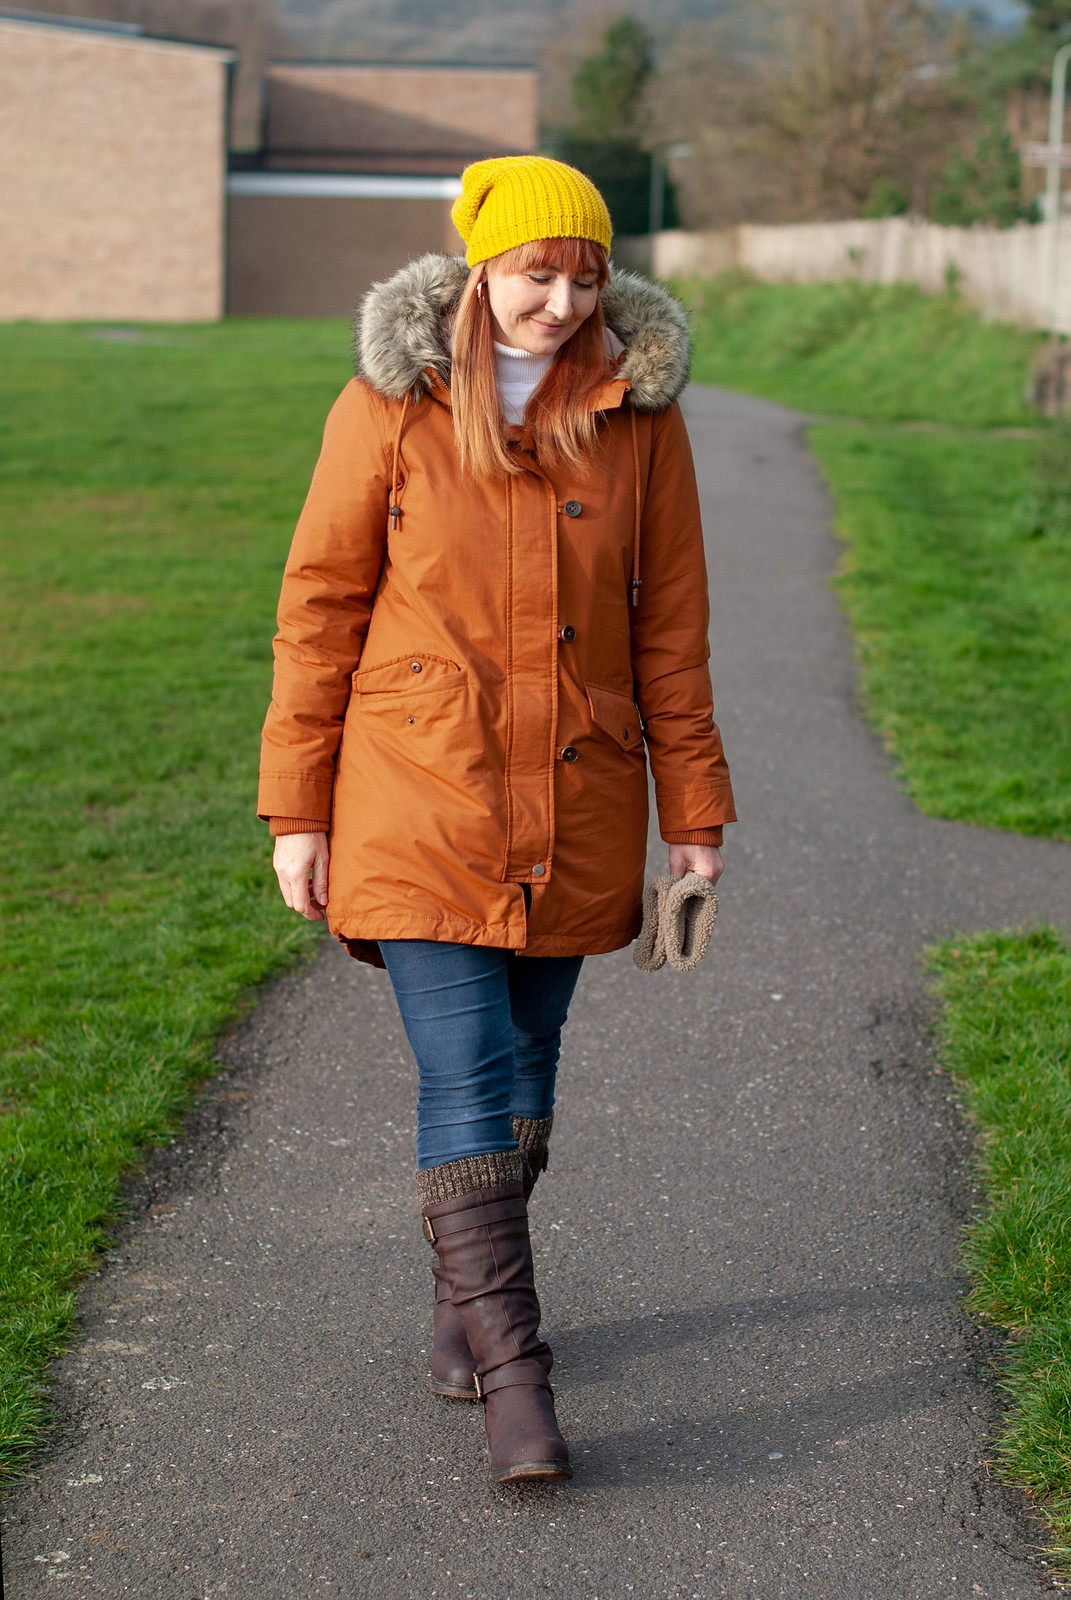 A Colourful, Stylish Walking the Dog Outfit With Crazy-Comfy Boots \ orange-brown parka \ knee high brown boots \ yellow beanie | Not Dressed As Lamb, over 40 style